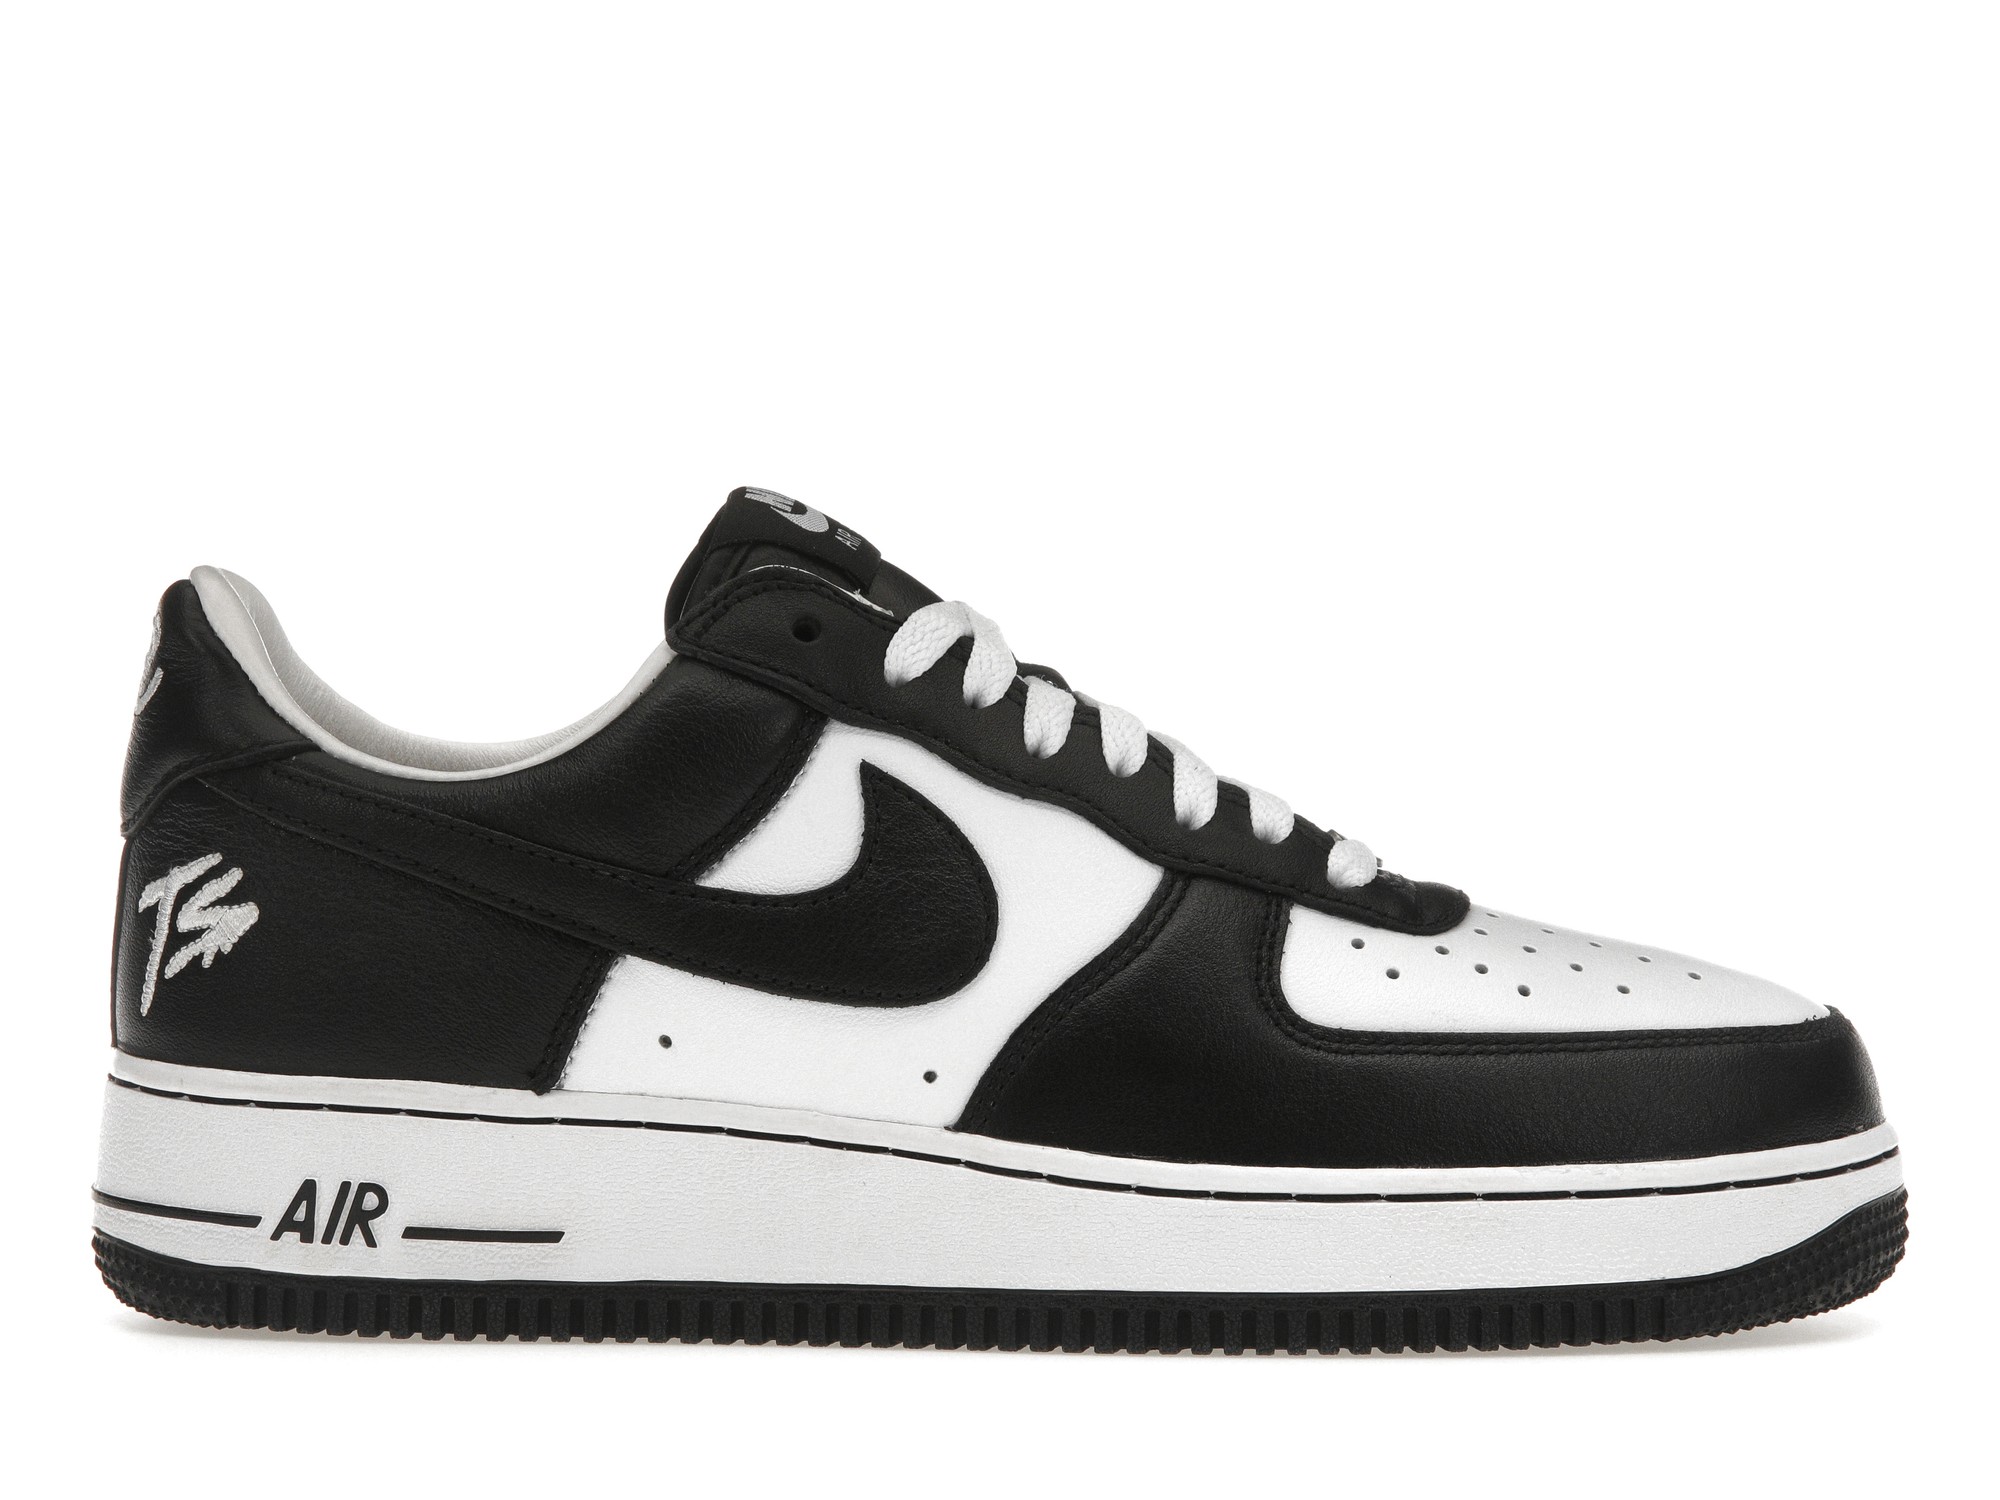 Nike Air Force 1 low qs blackout